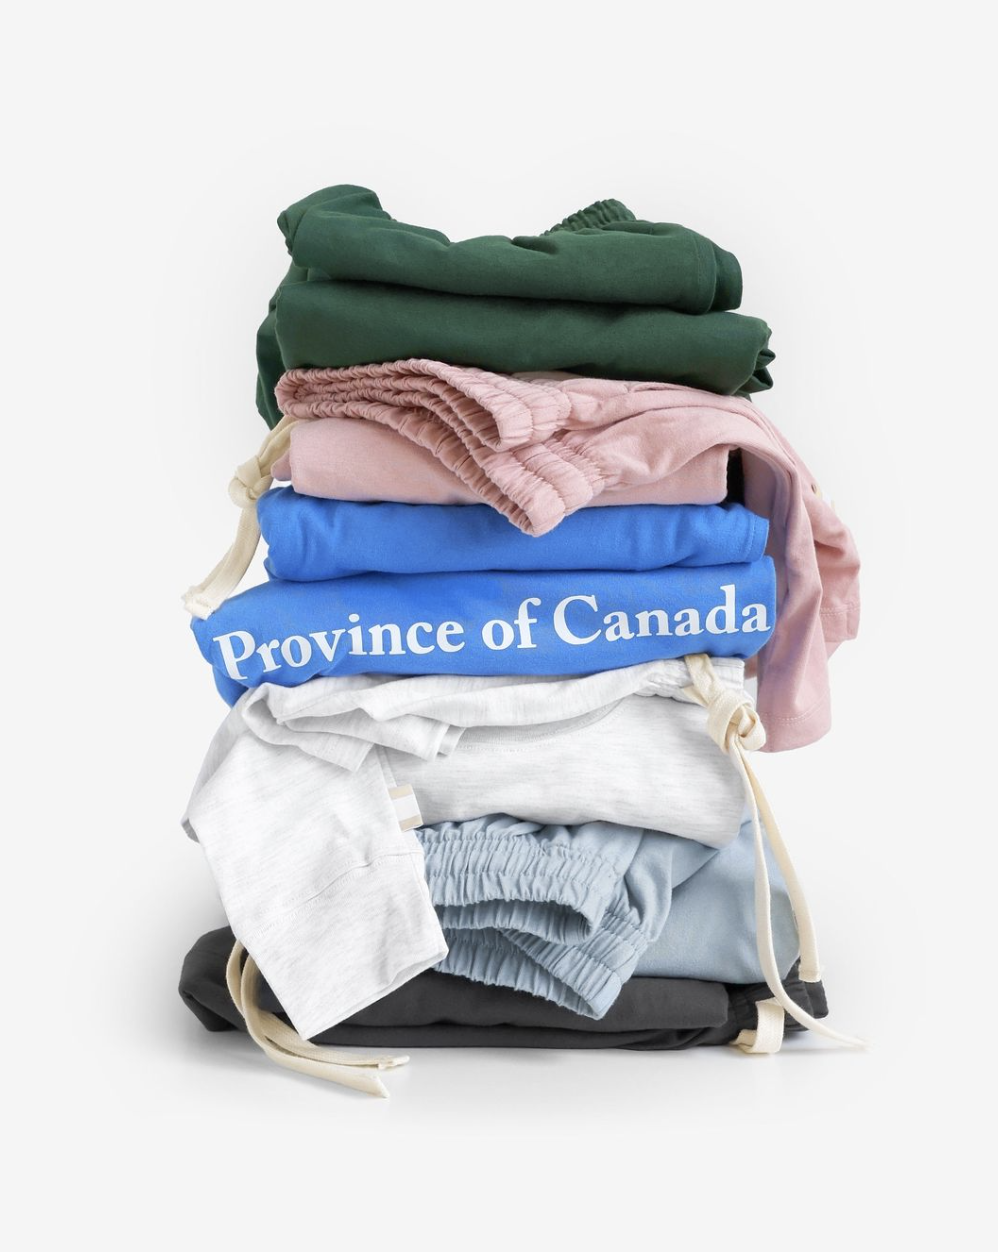 A pile of Province of Canada clothing